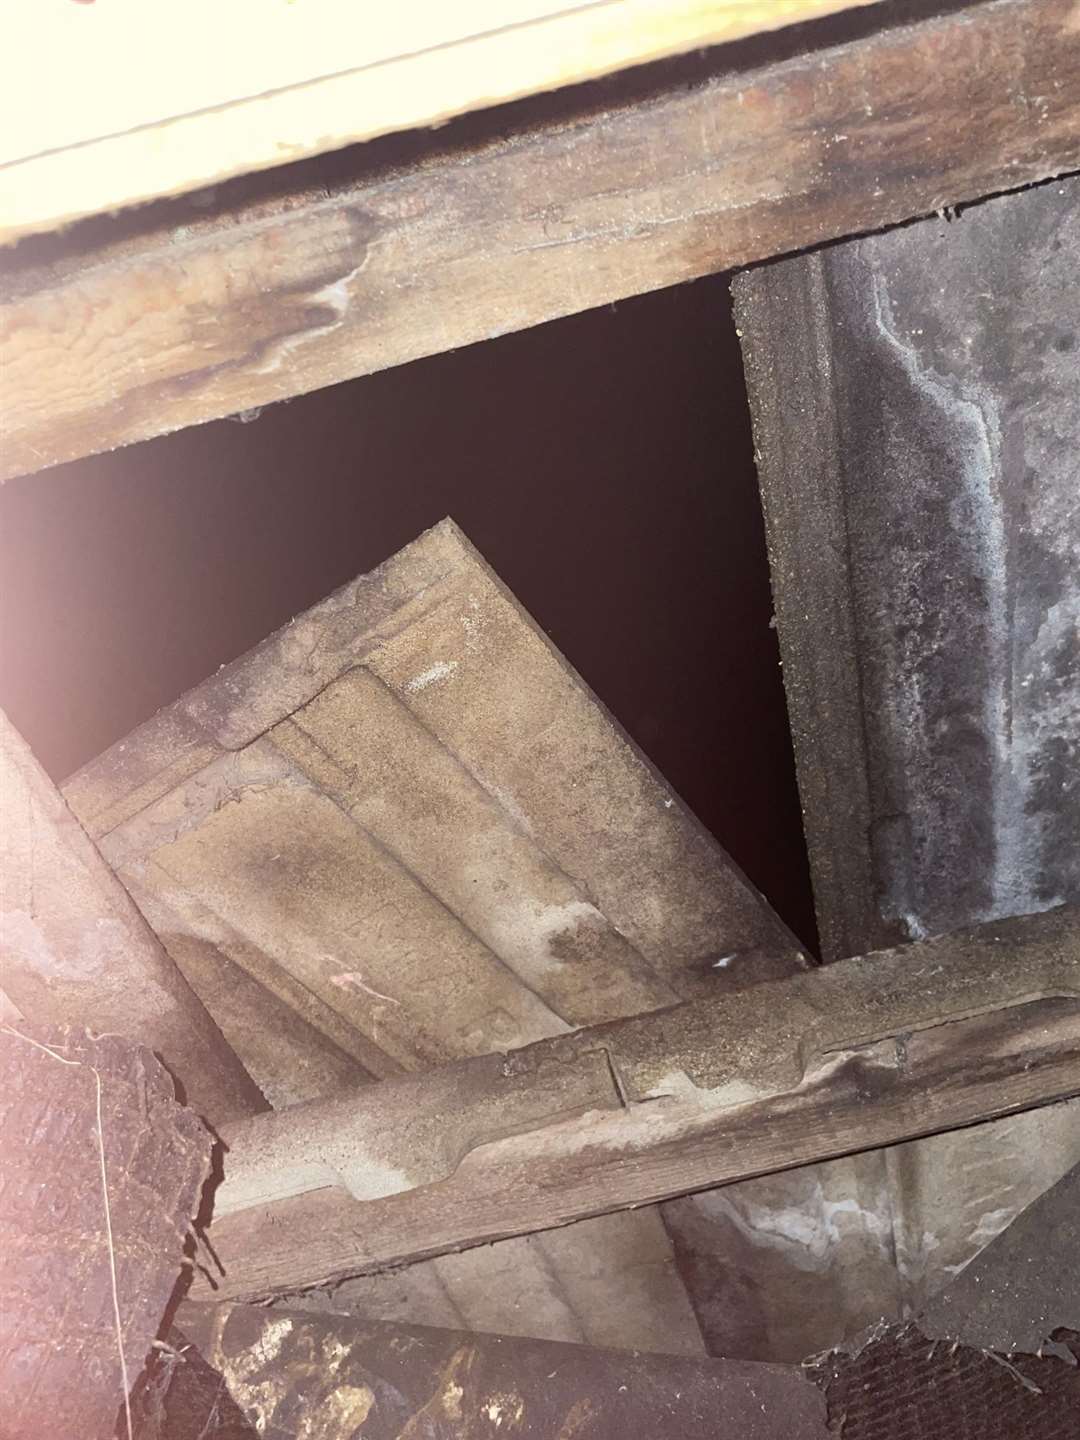 The hole in the roof